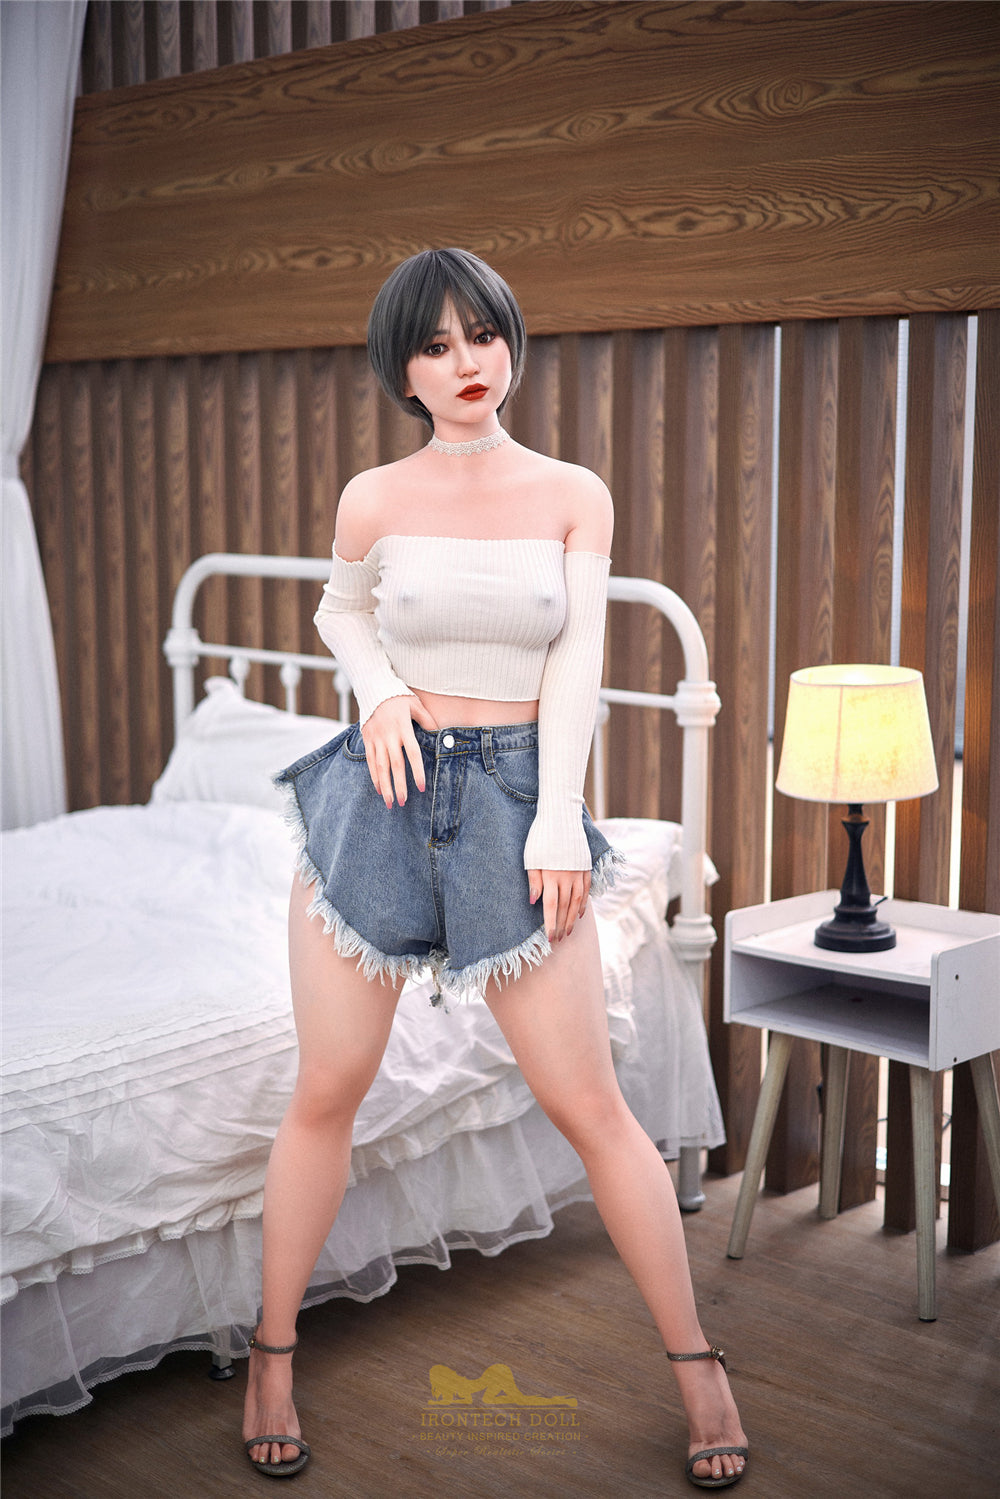 Irontech Doll 152 cm Silicone - Dior | Buy Sex Dolls at DOLLS ACTUALLY